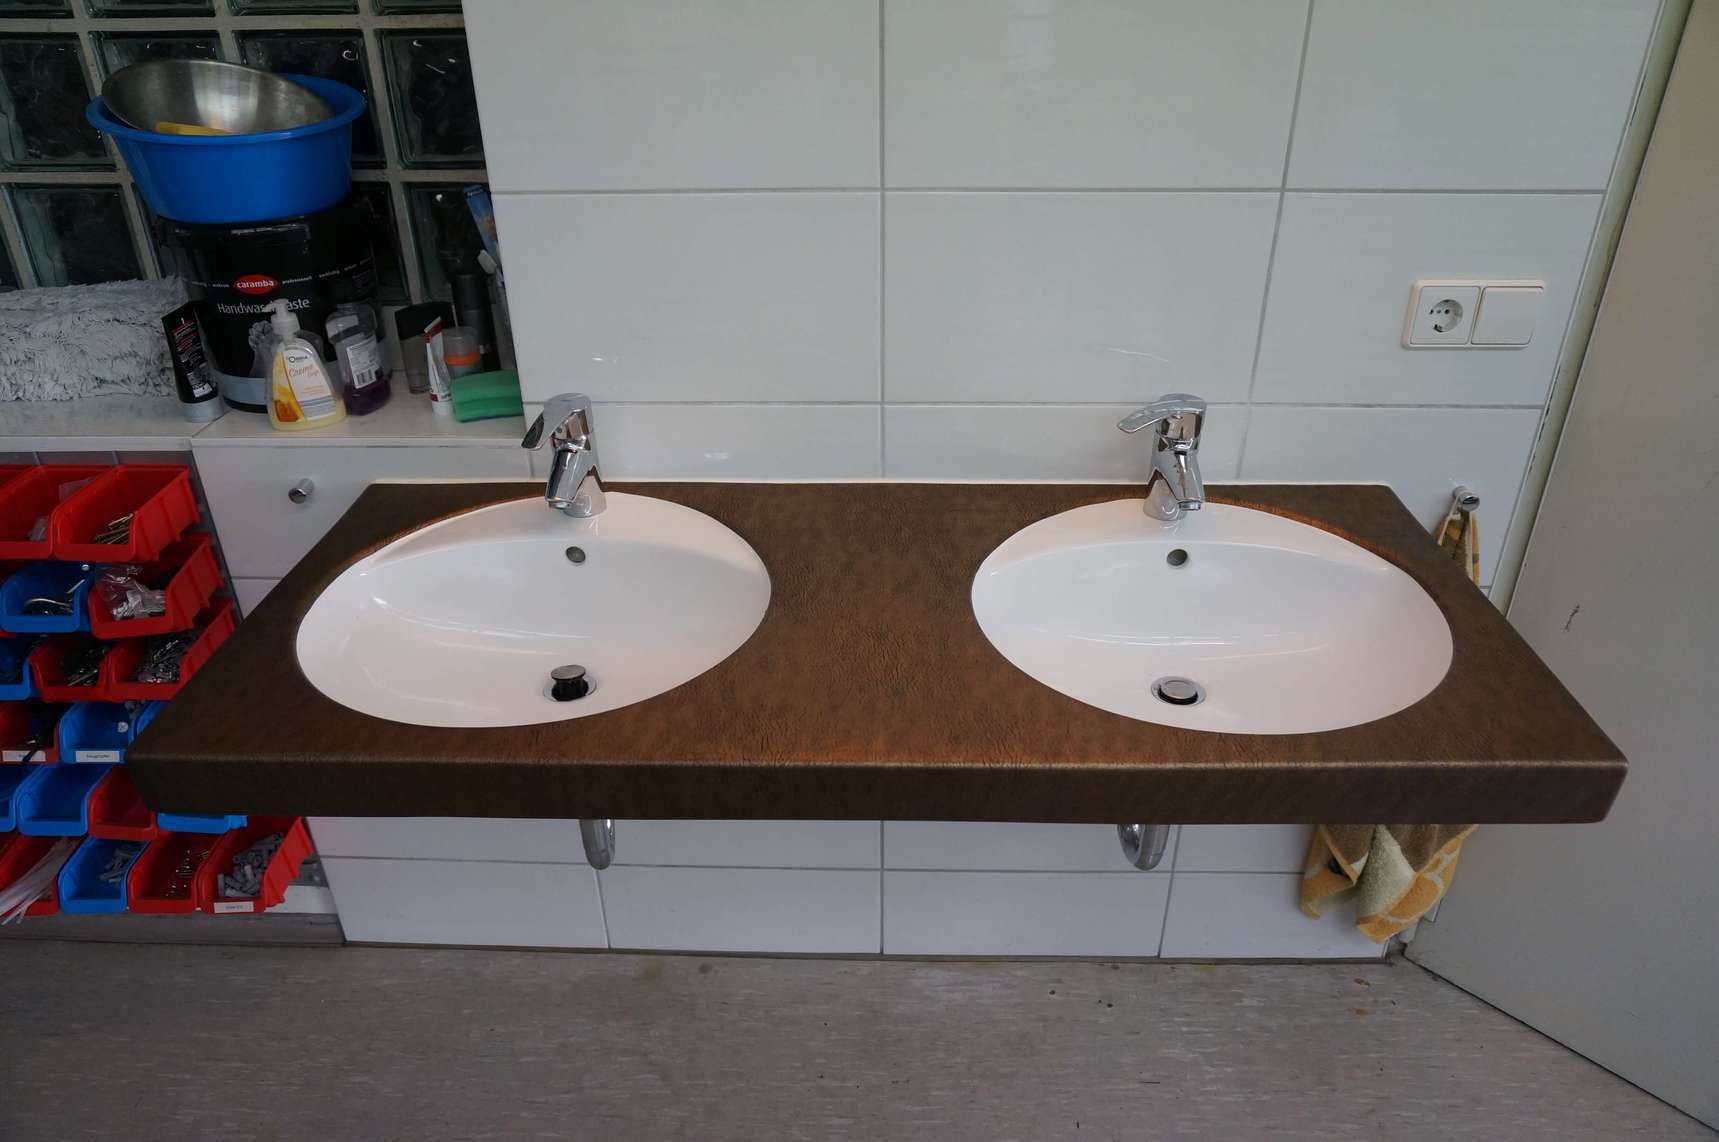 Renovate the surface of the double washbasin with a film as a coating - after